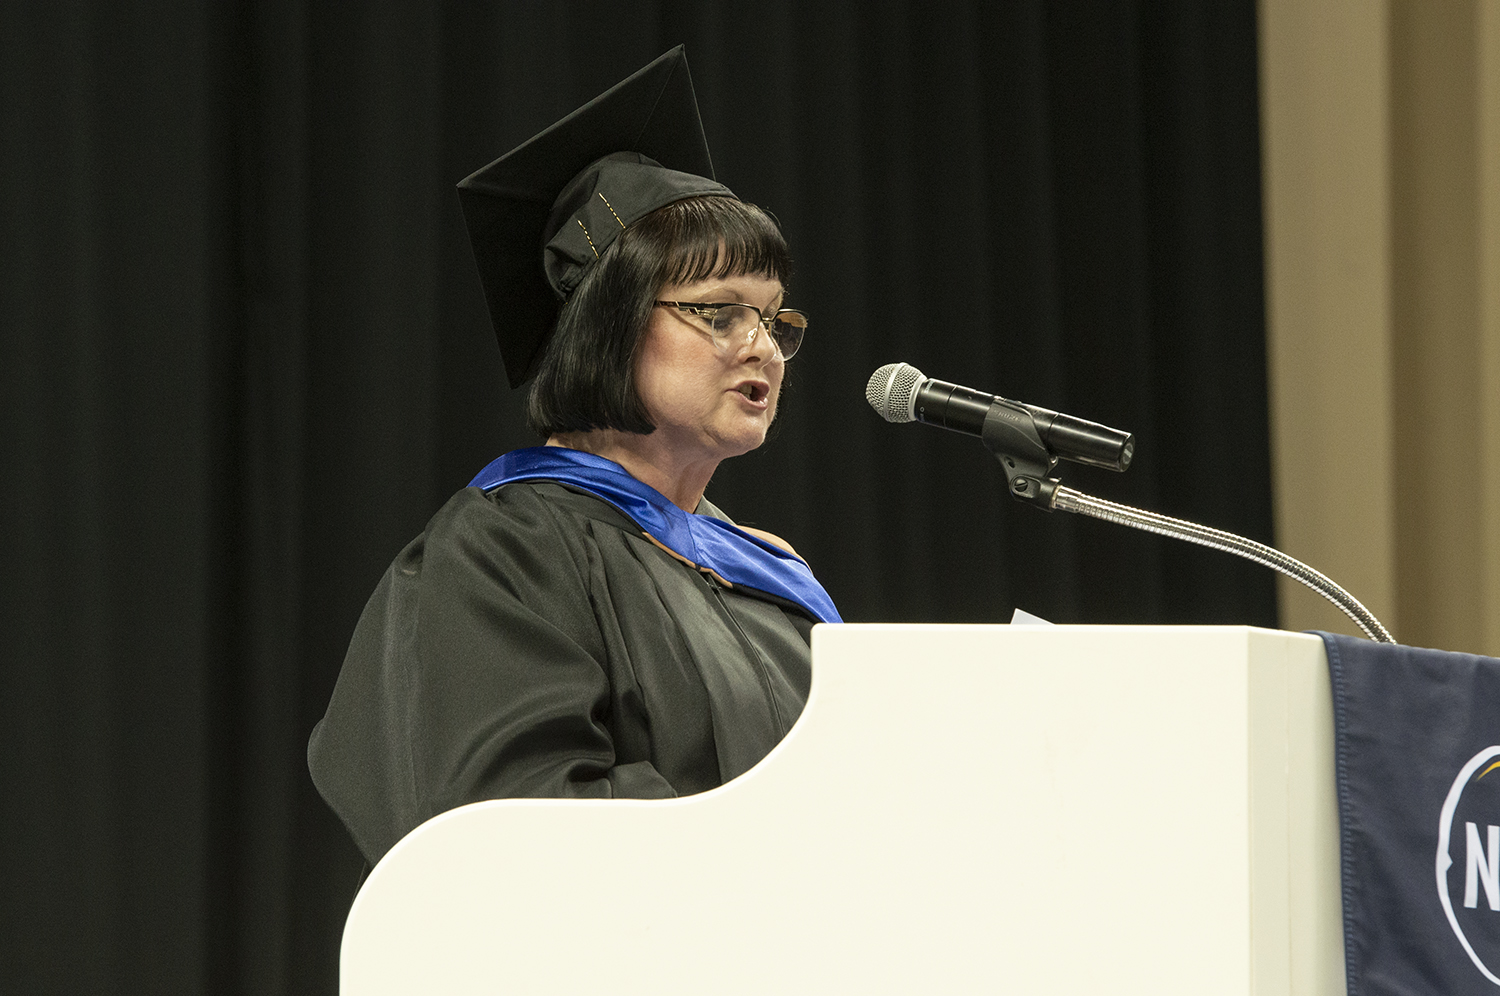 Kelly Hagen giving the 2022 Northwest Technical College Commencement Address